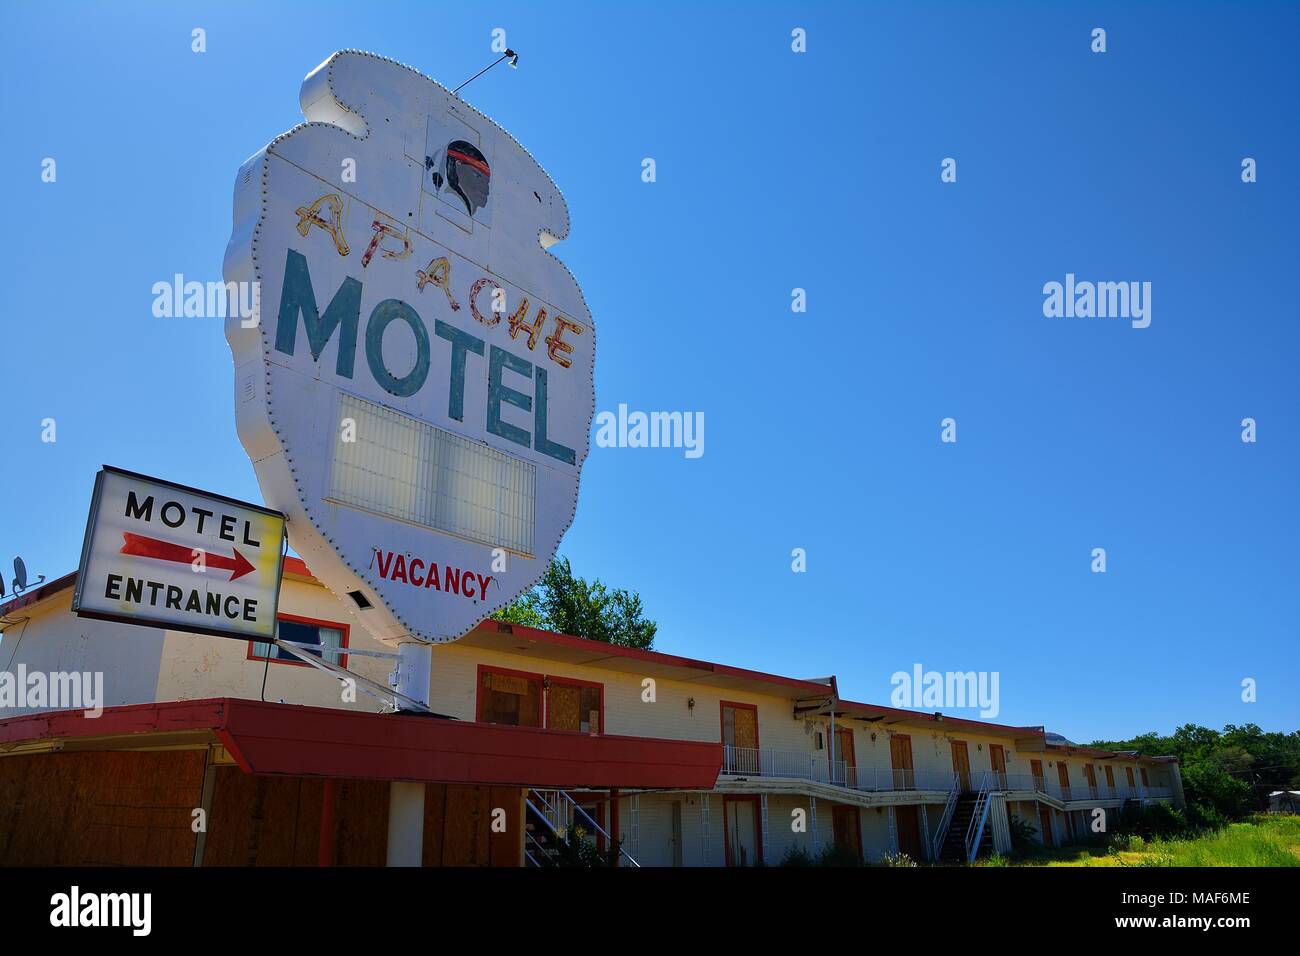 TUCUMCARI, NEW MEXICO - JULY 21: Apache Motel on Historic Route 66 on July 21, 2017 in Tucumcari, New Mexico. The Apache Motel has been serving travel Stock Photo